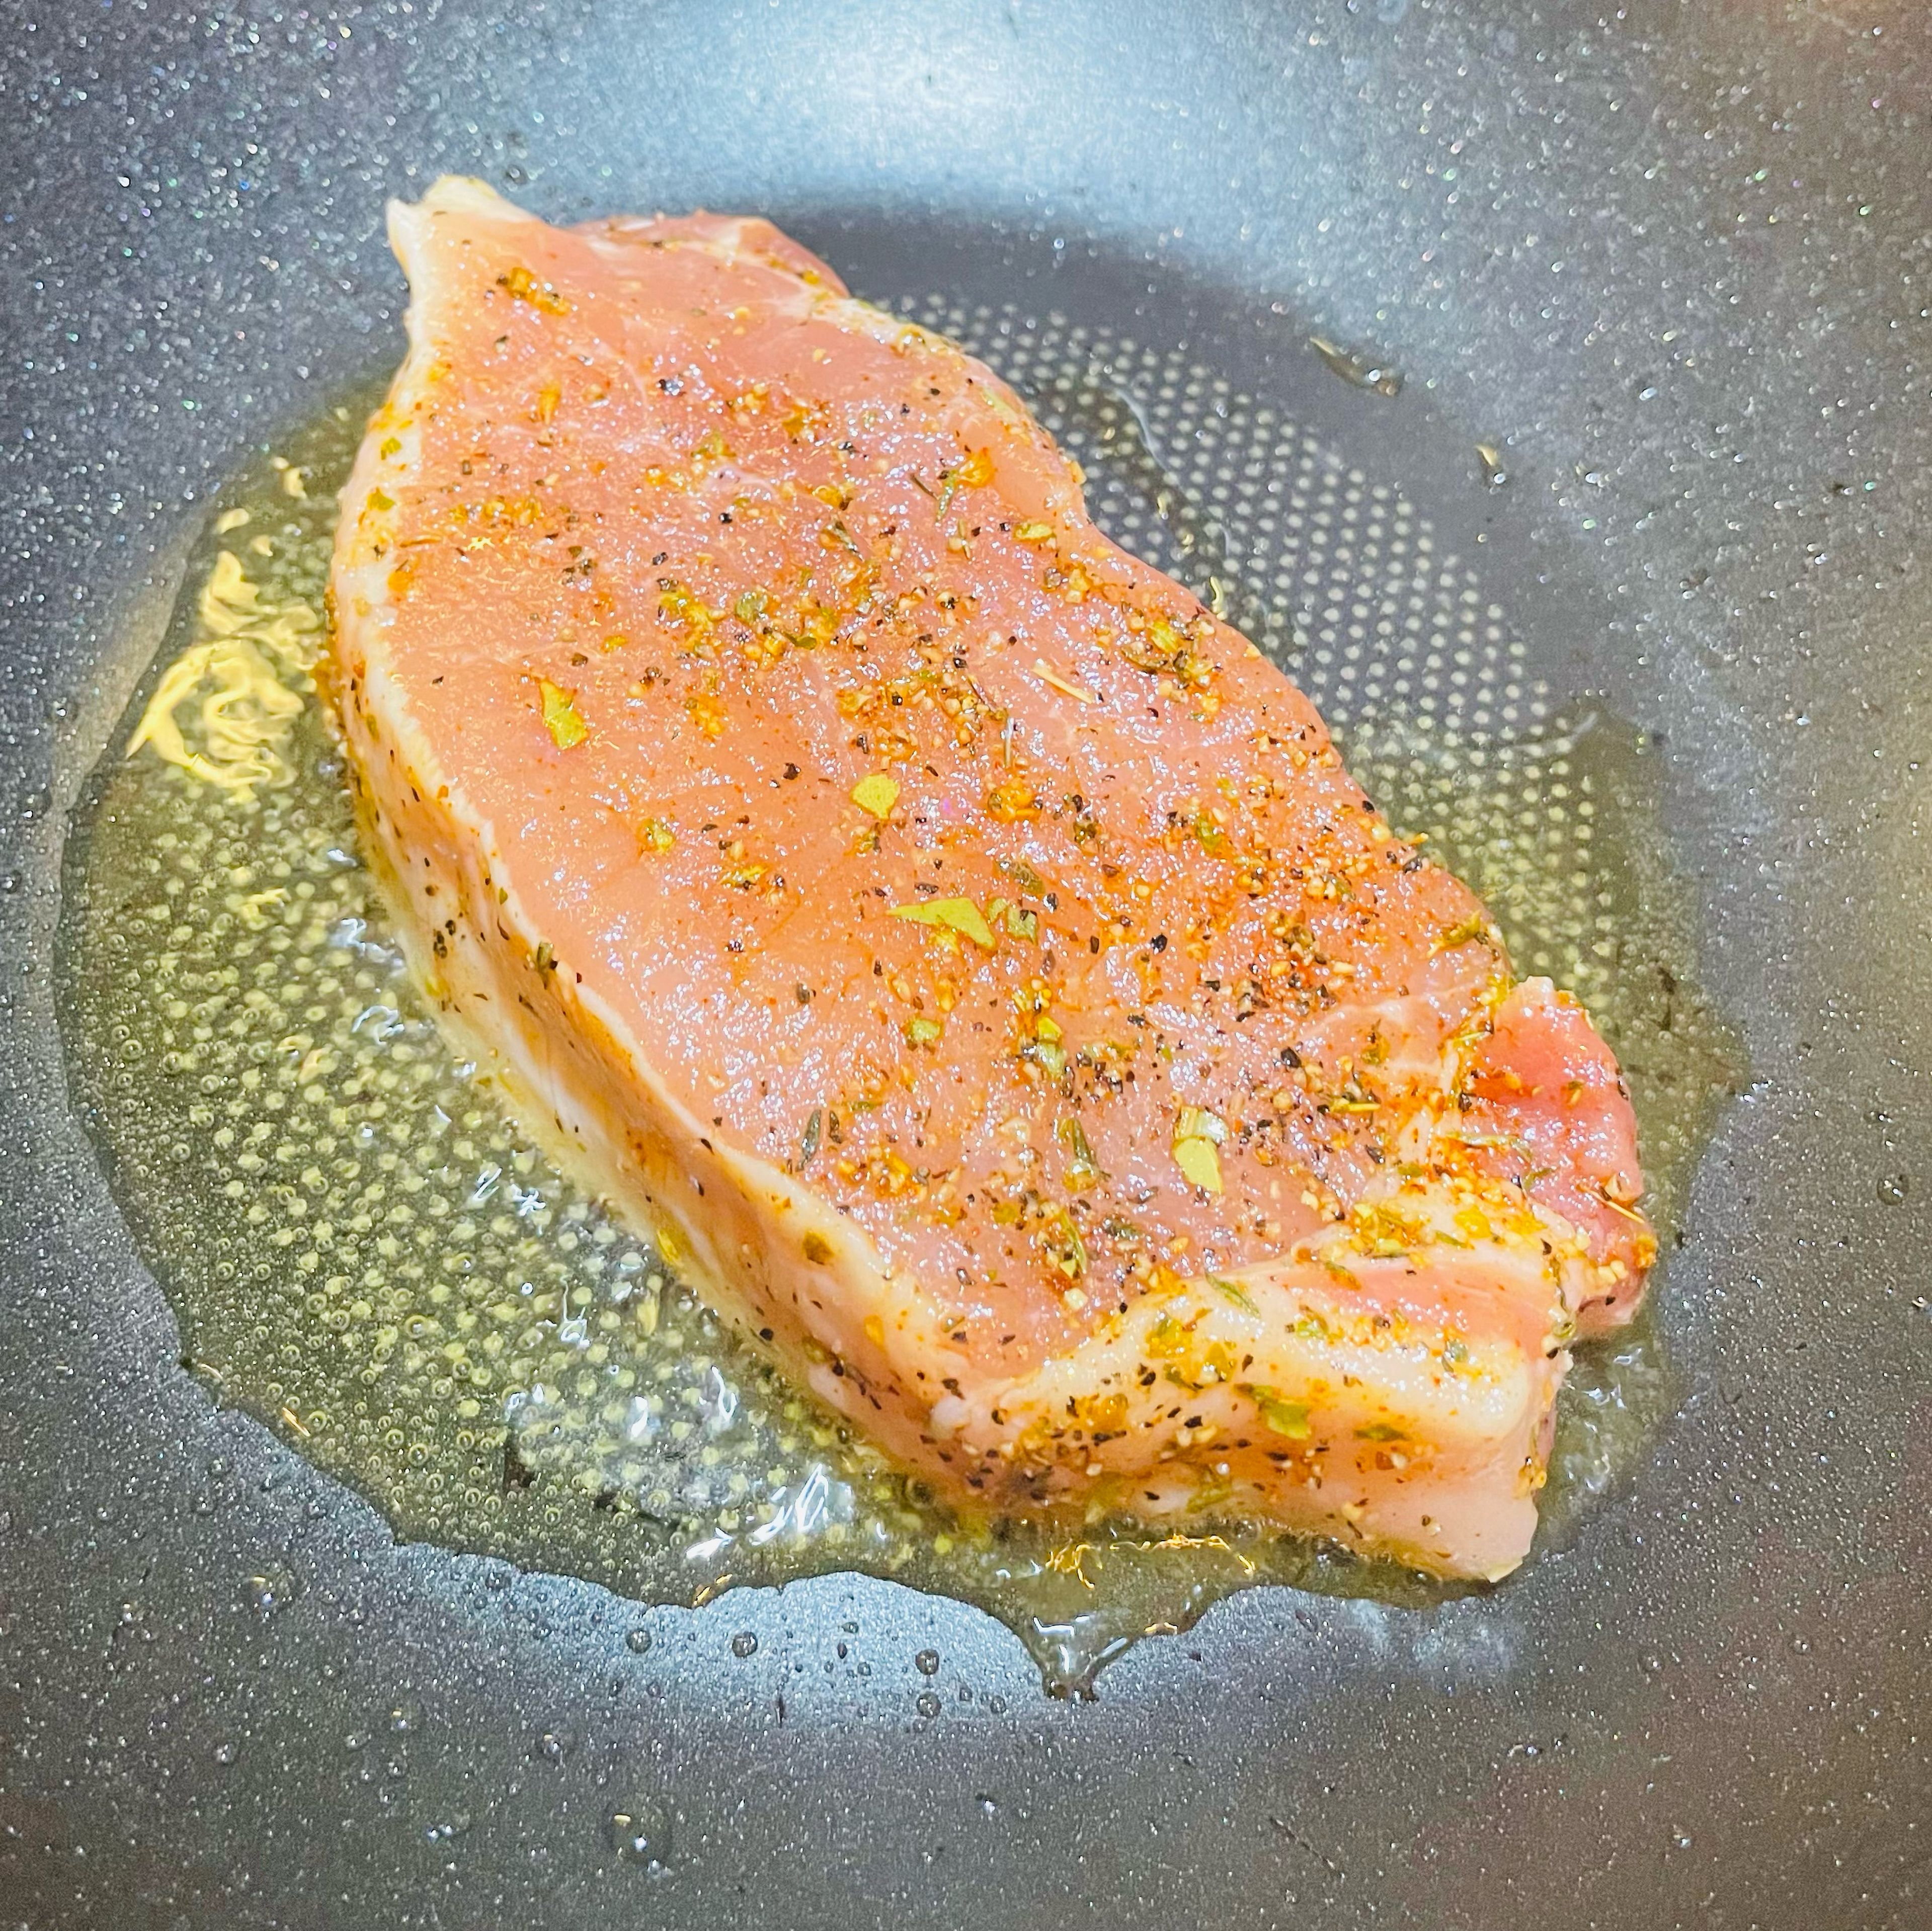 Heat frying pan and add olive oil, then add marinated pork loin. Cook for about 5 minutes each side until golden brown.